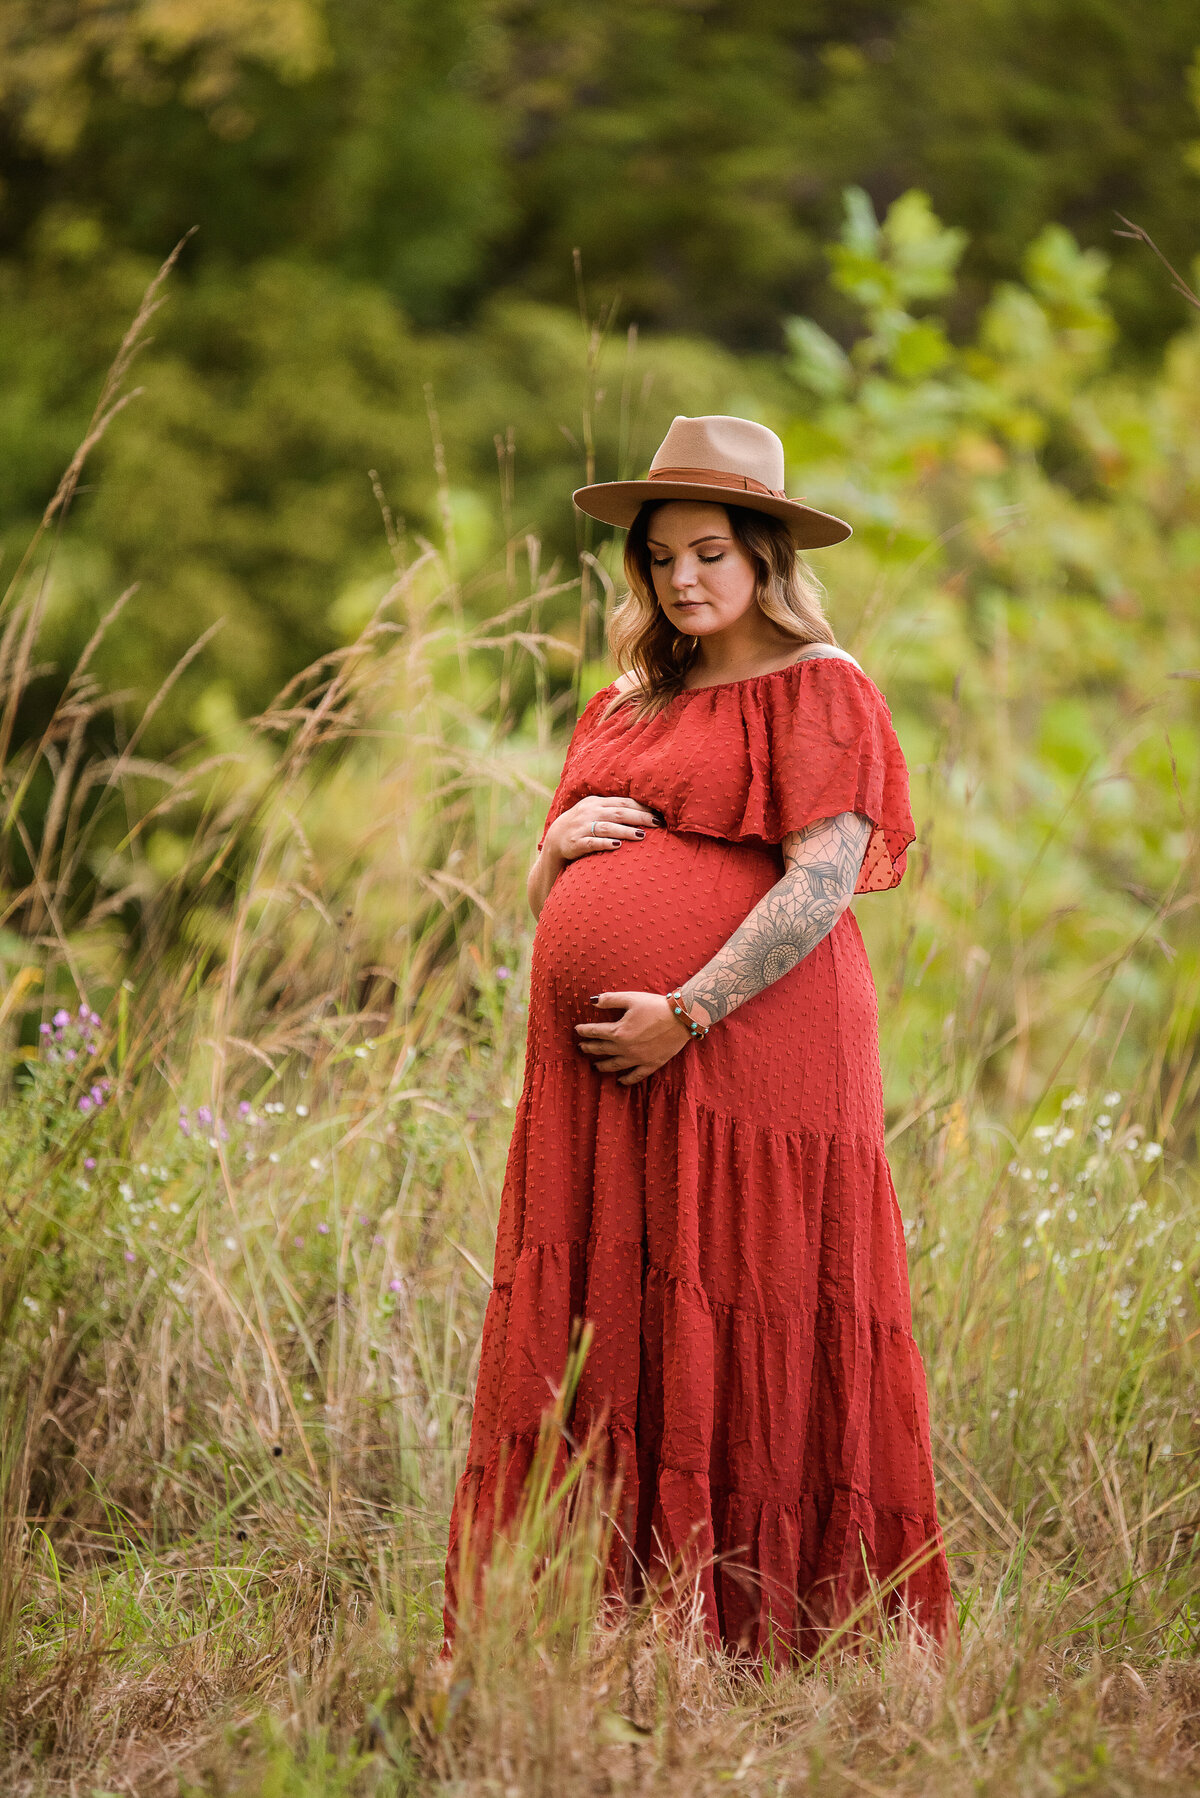 best maternity photography Indianapolis IN, get maternity pictures taken